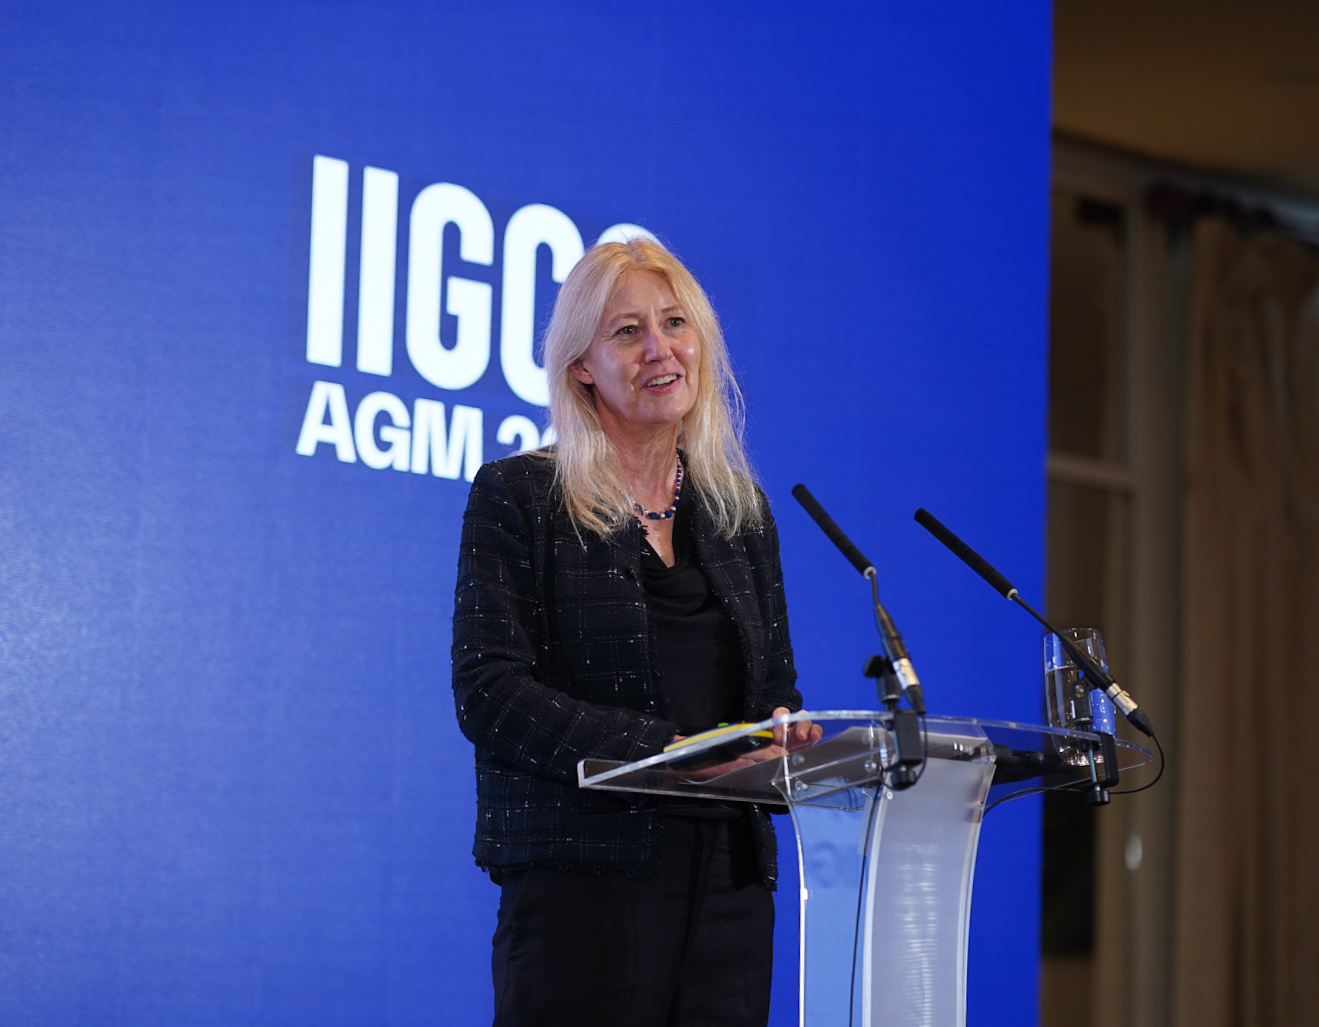 IIGCC appoints three board members at Annual General Meeting